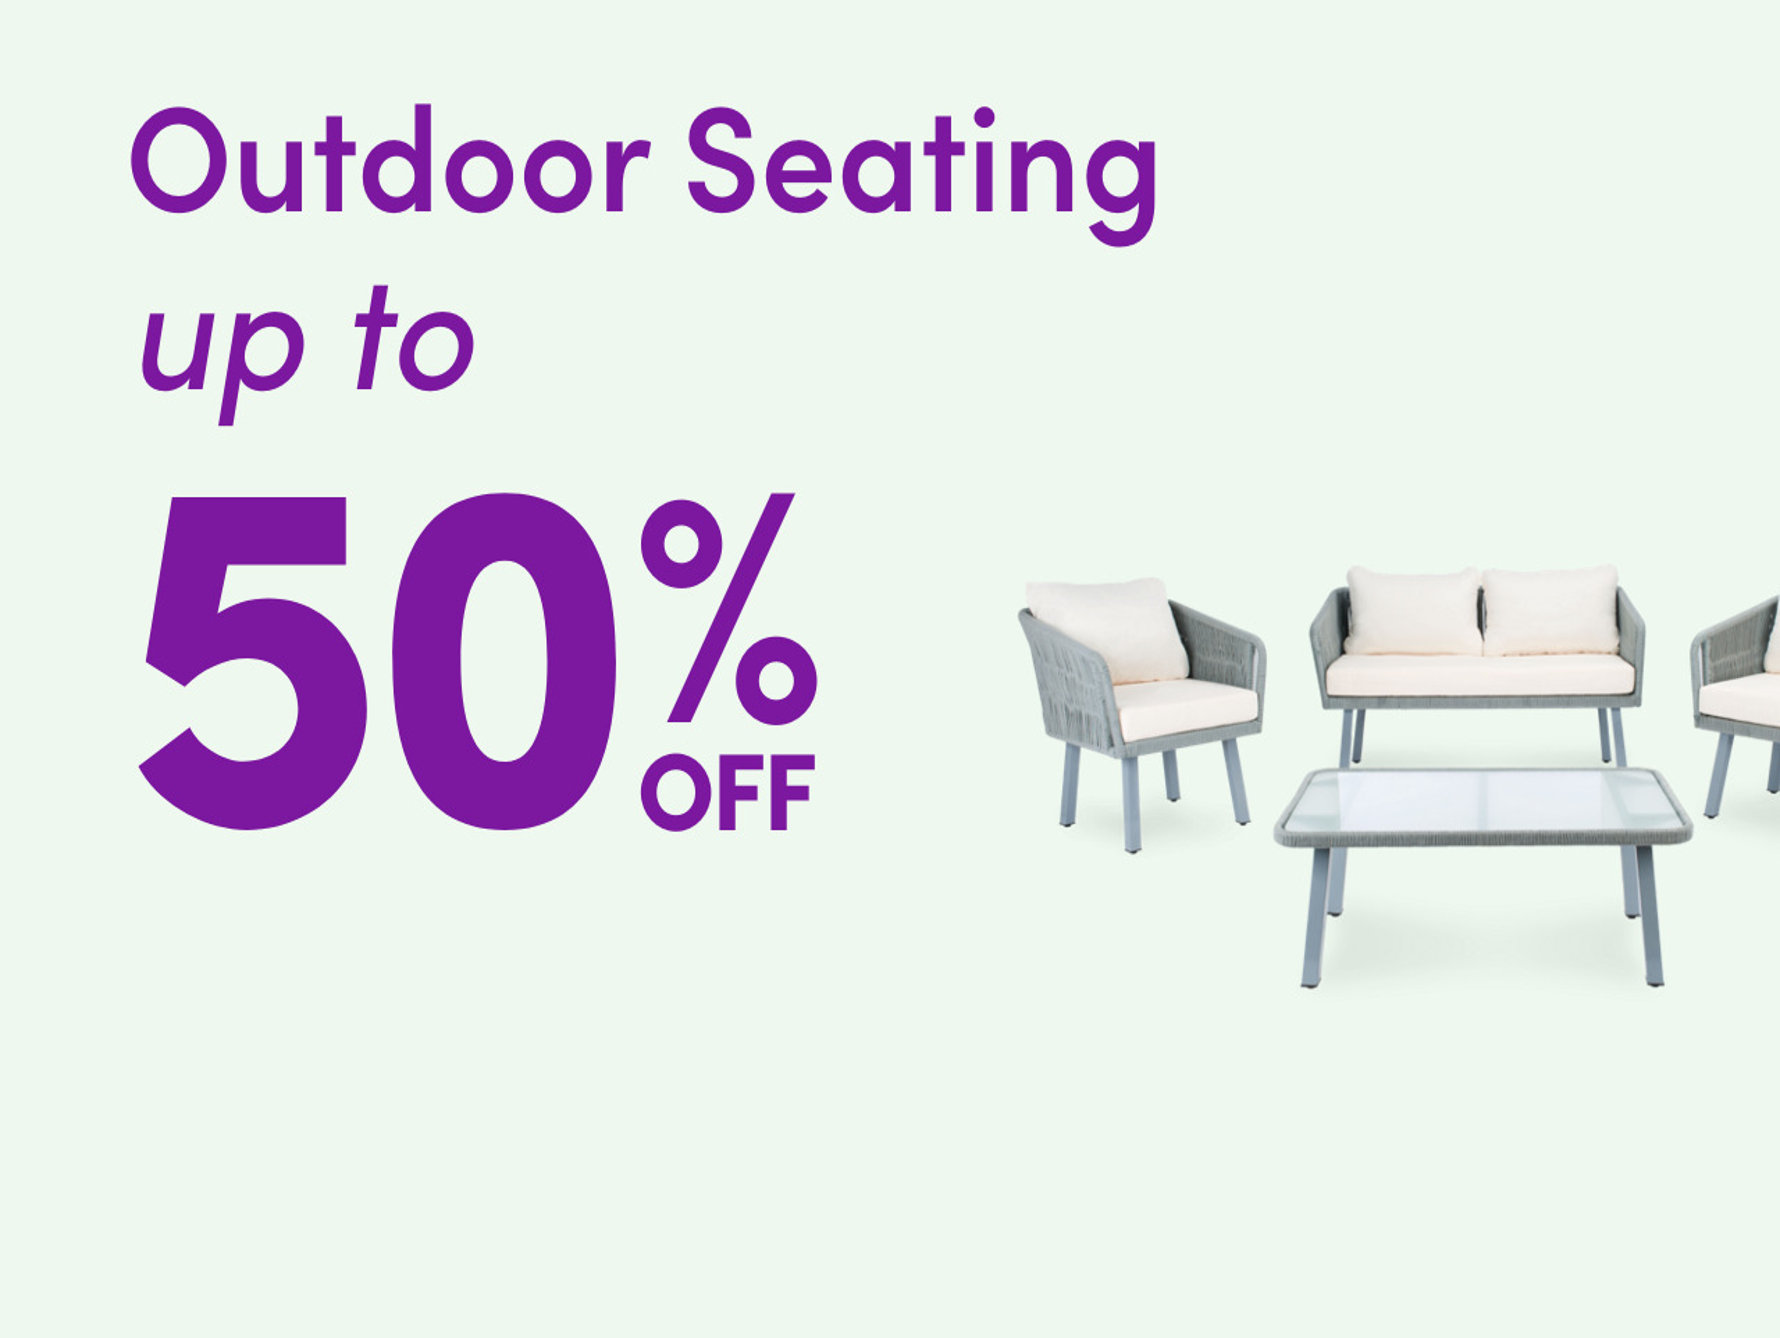 Outdoor Seating up to 50% off